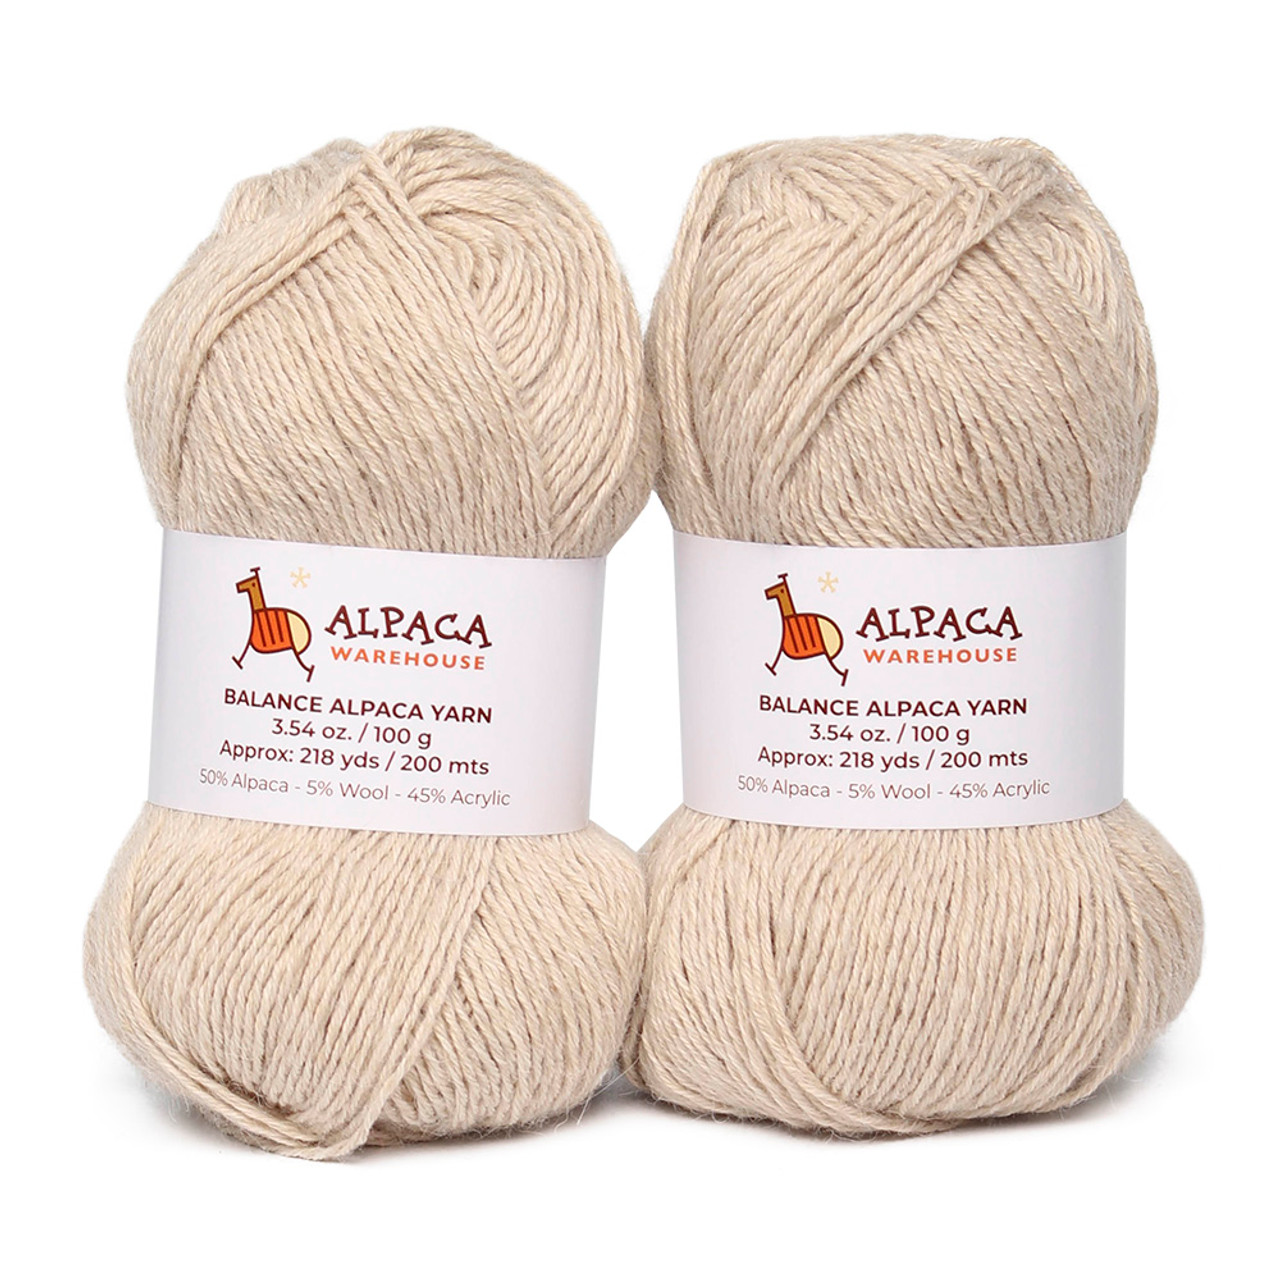 Blend Alpaca Yarn Wool 2 Skeins 200 Grams Bulky Weight - Heavenly Soft and  Perfect for Knitting and Crocheting (Red, Bulky Weight)